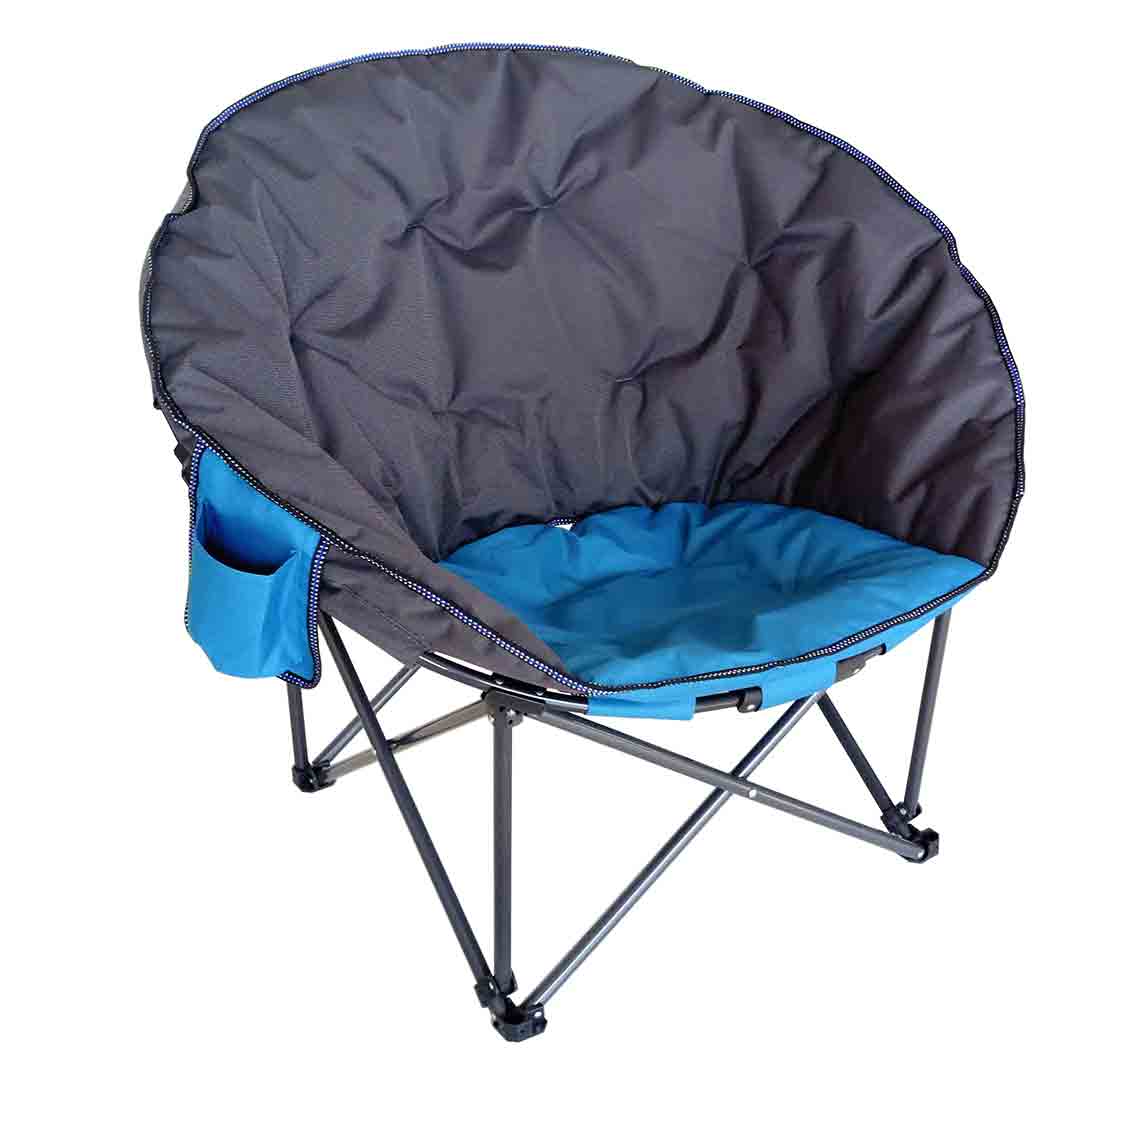 JJYC-3005 Steel camping folding chair Featured Image